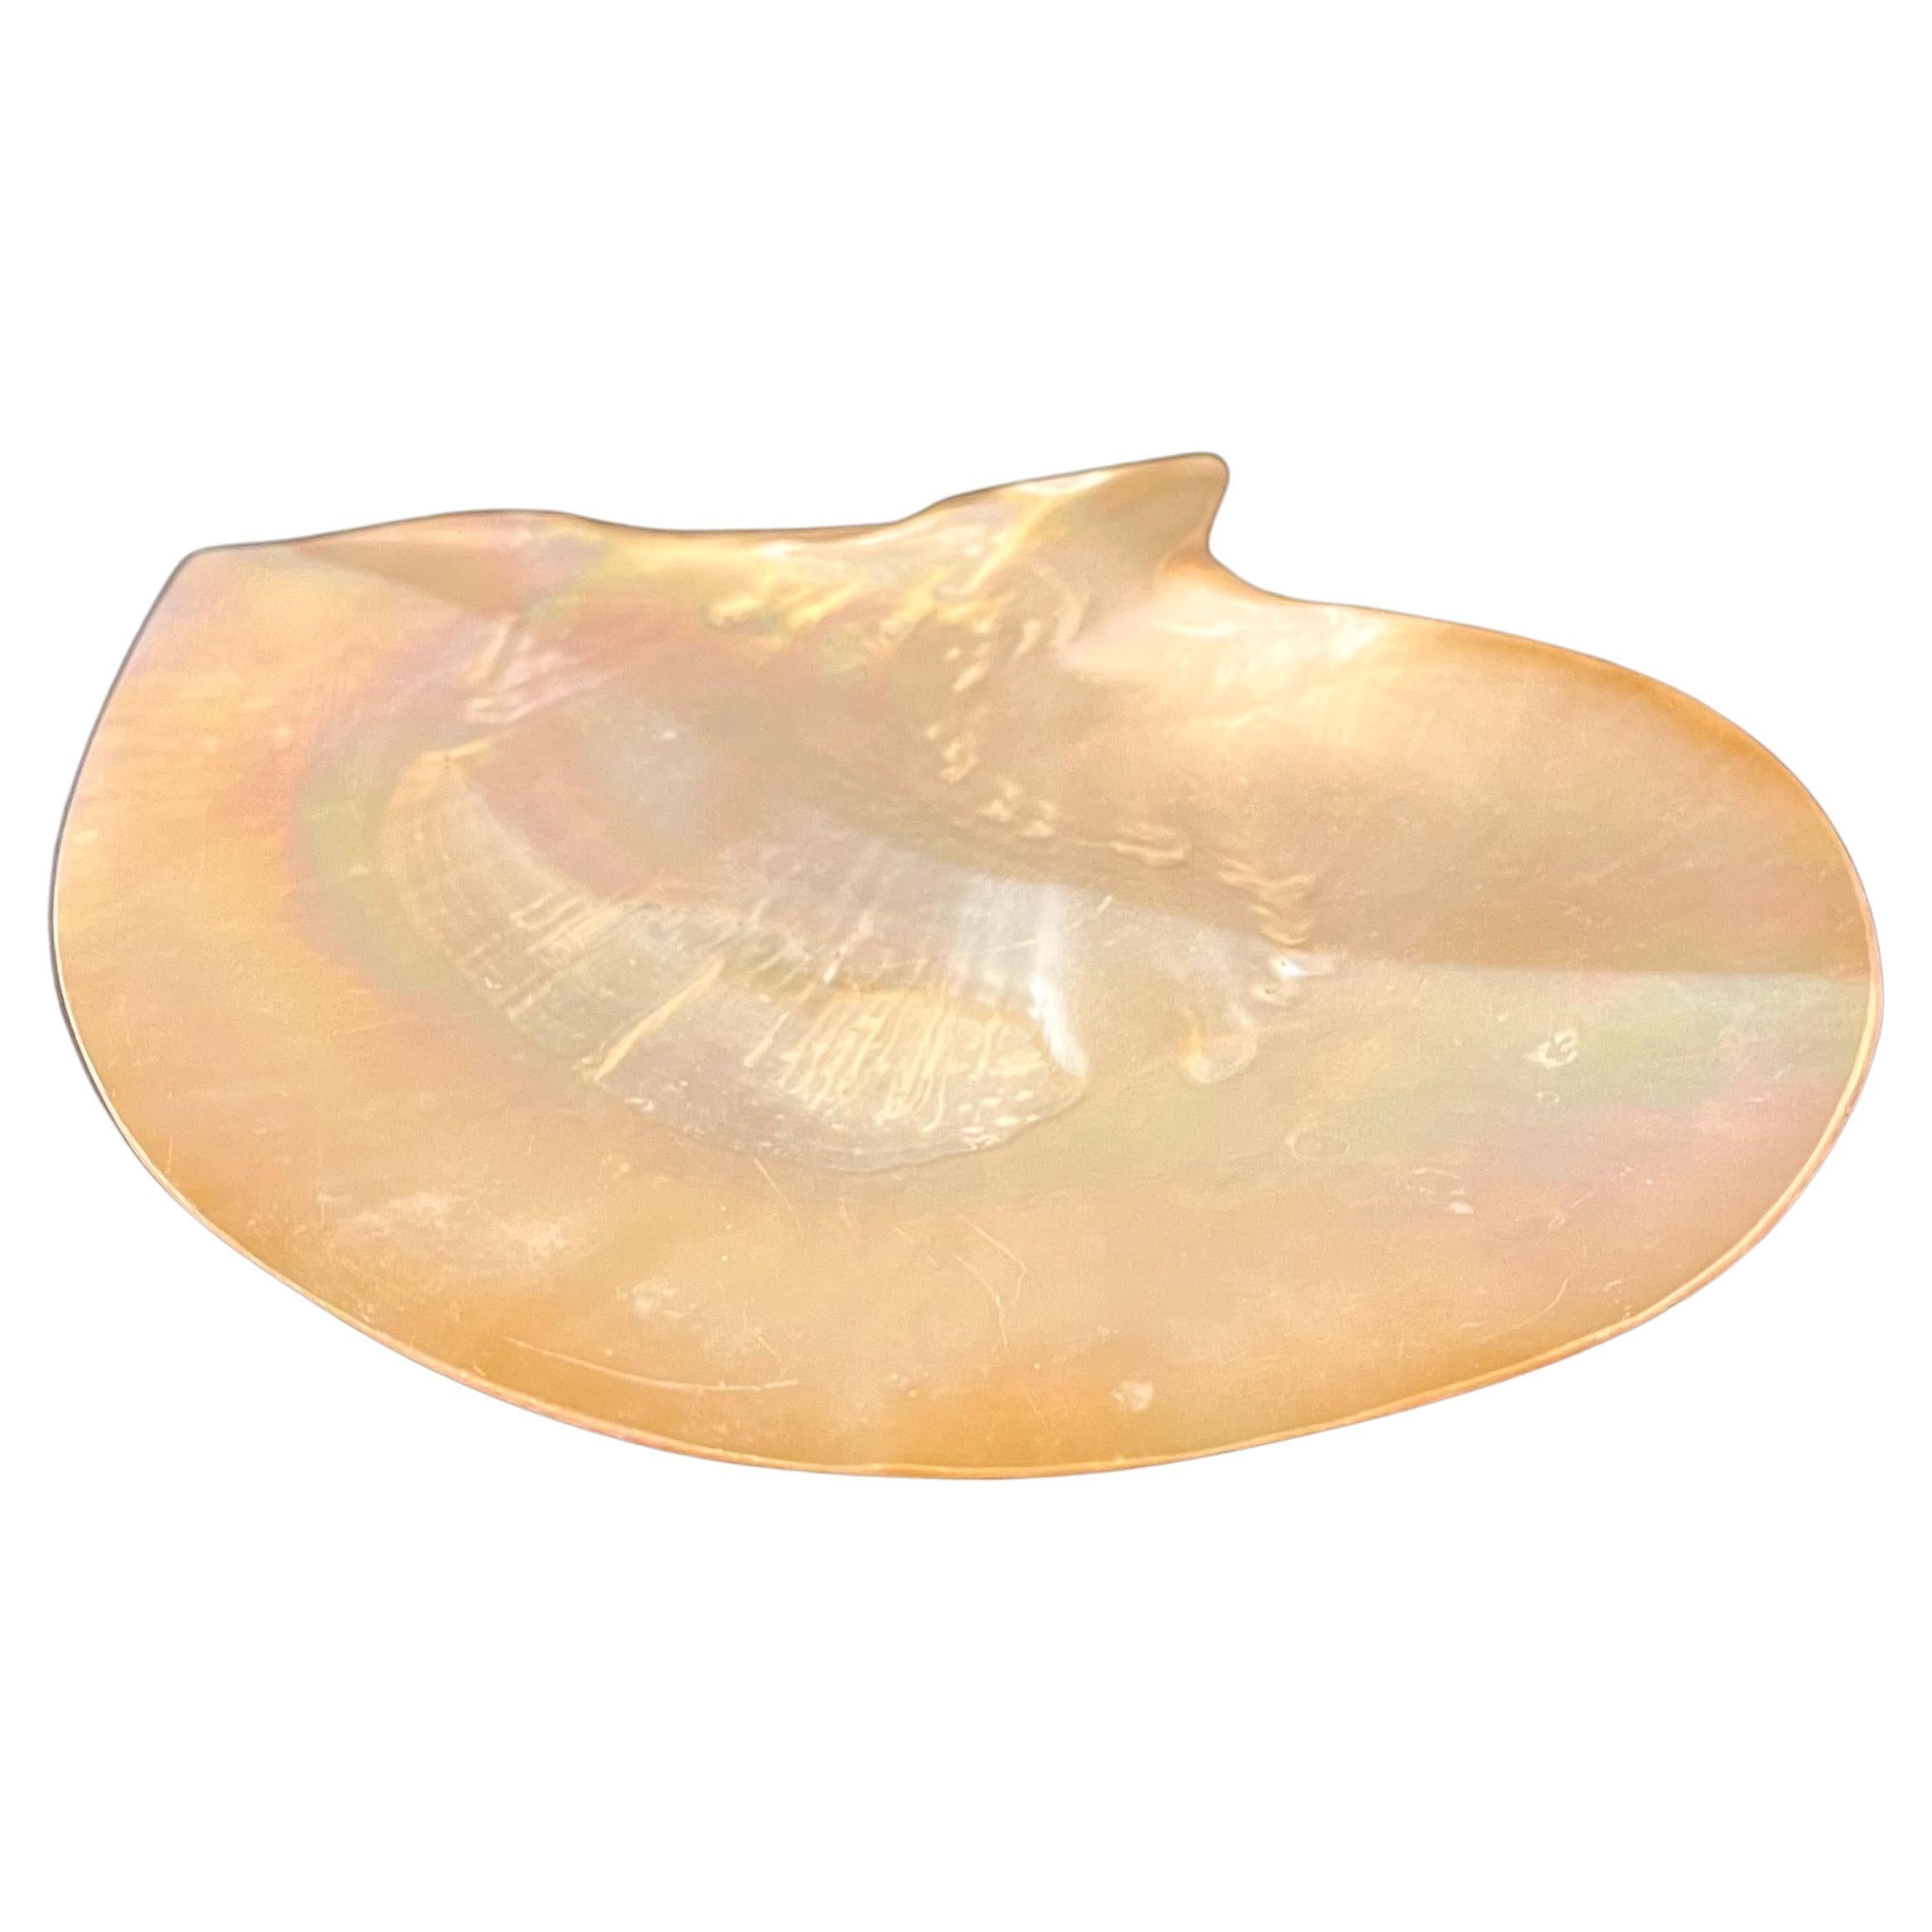 Vintage Beautiful Mother of Pearl Irredescent Large Mussel Clam Half Shell